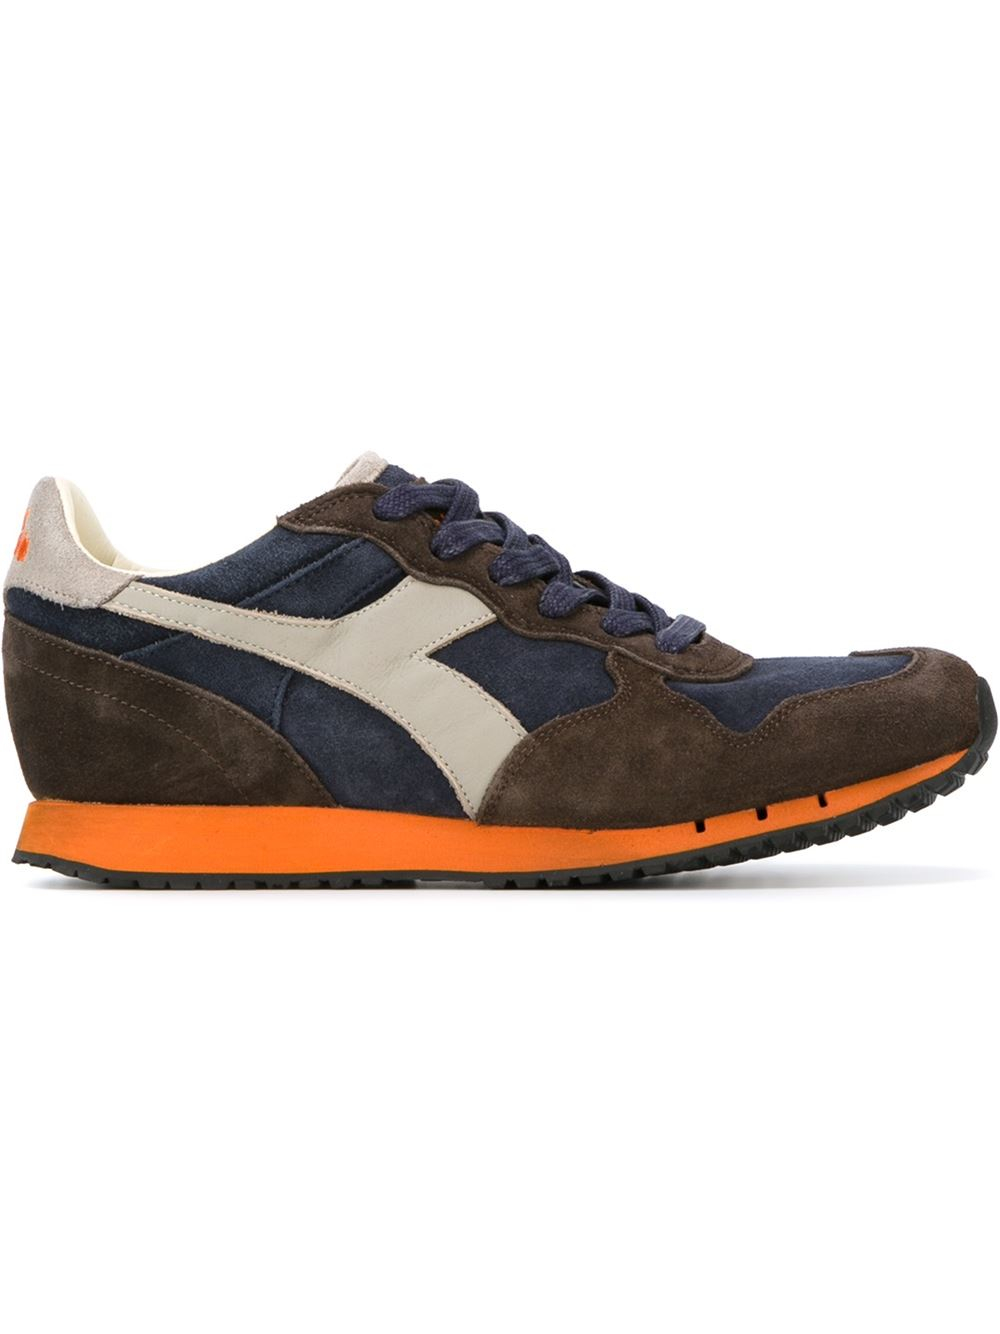 Lyst - Diadora 'trident' Sneakers in Brown for Men